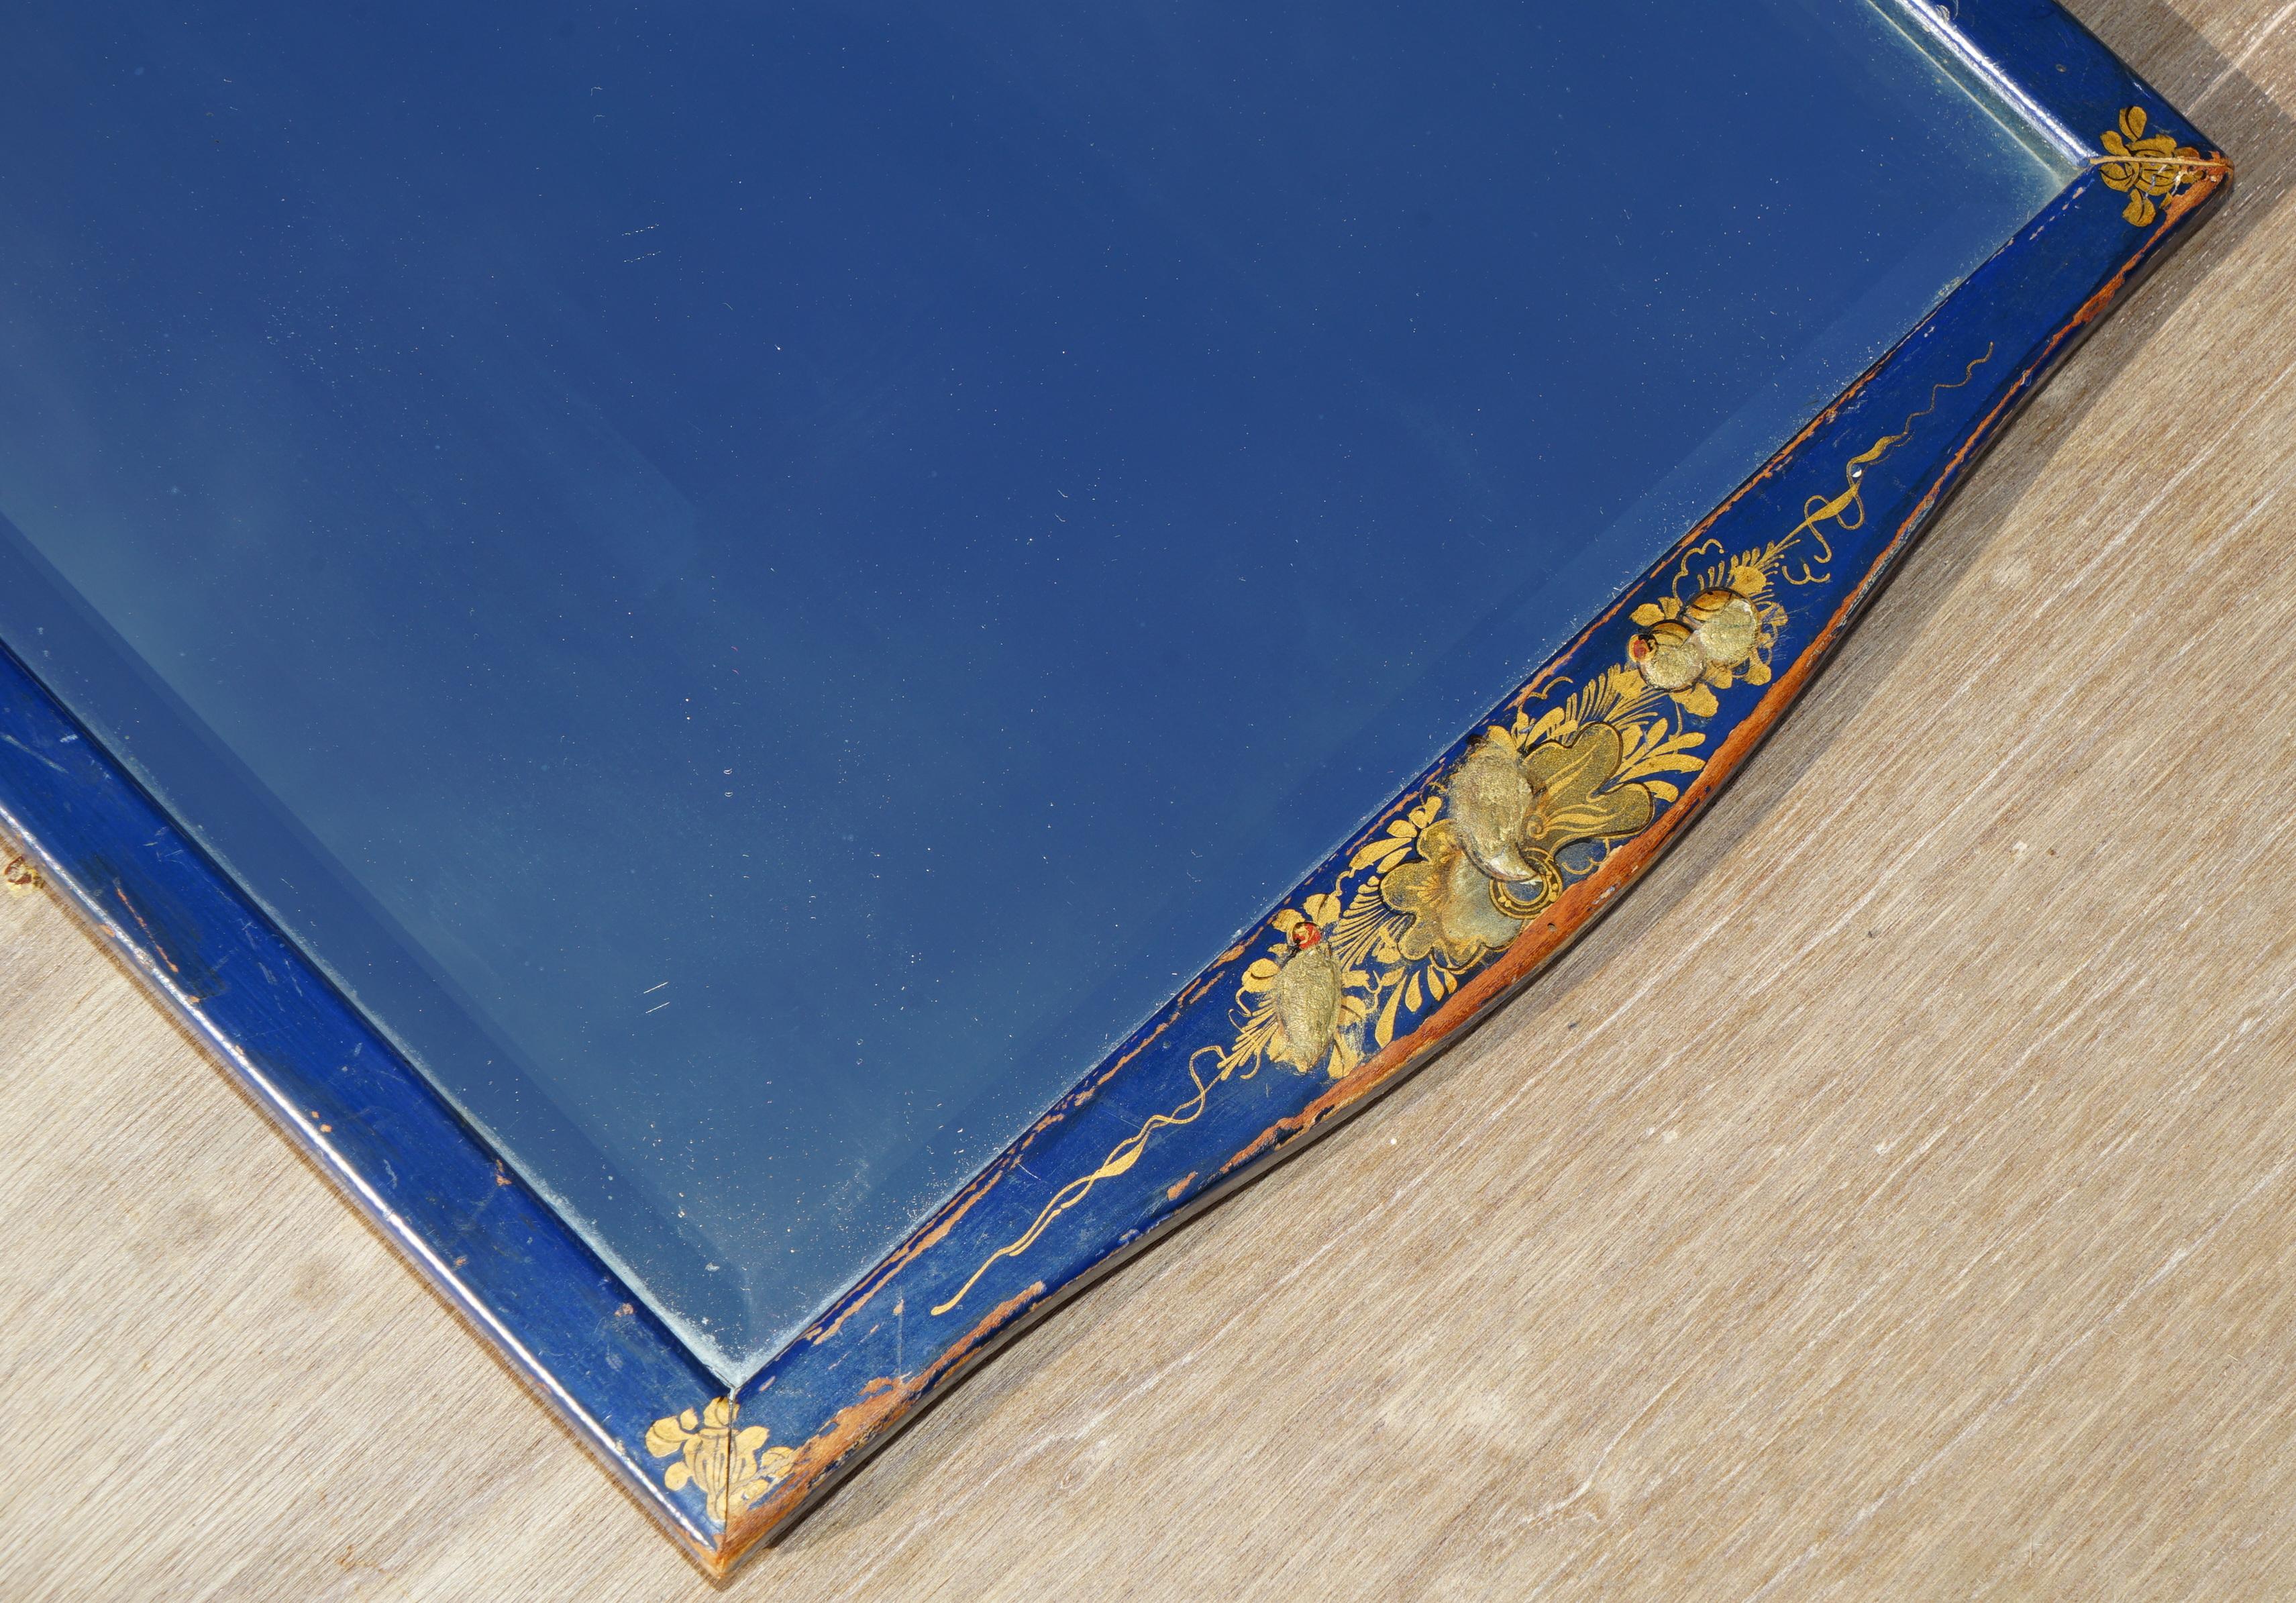 LOVELY ANTIQUE CHiNESE CHINOISERIE BLUE FRAMED MIRROR WITH ORNATE HAND PAINTINGS (Frühes 20. Jahrhundert) im Angebot